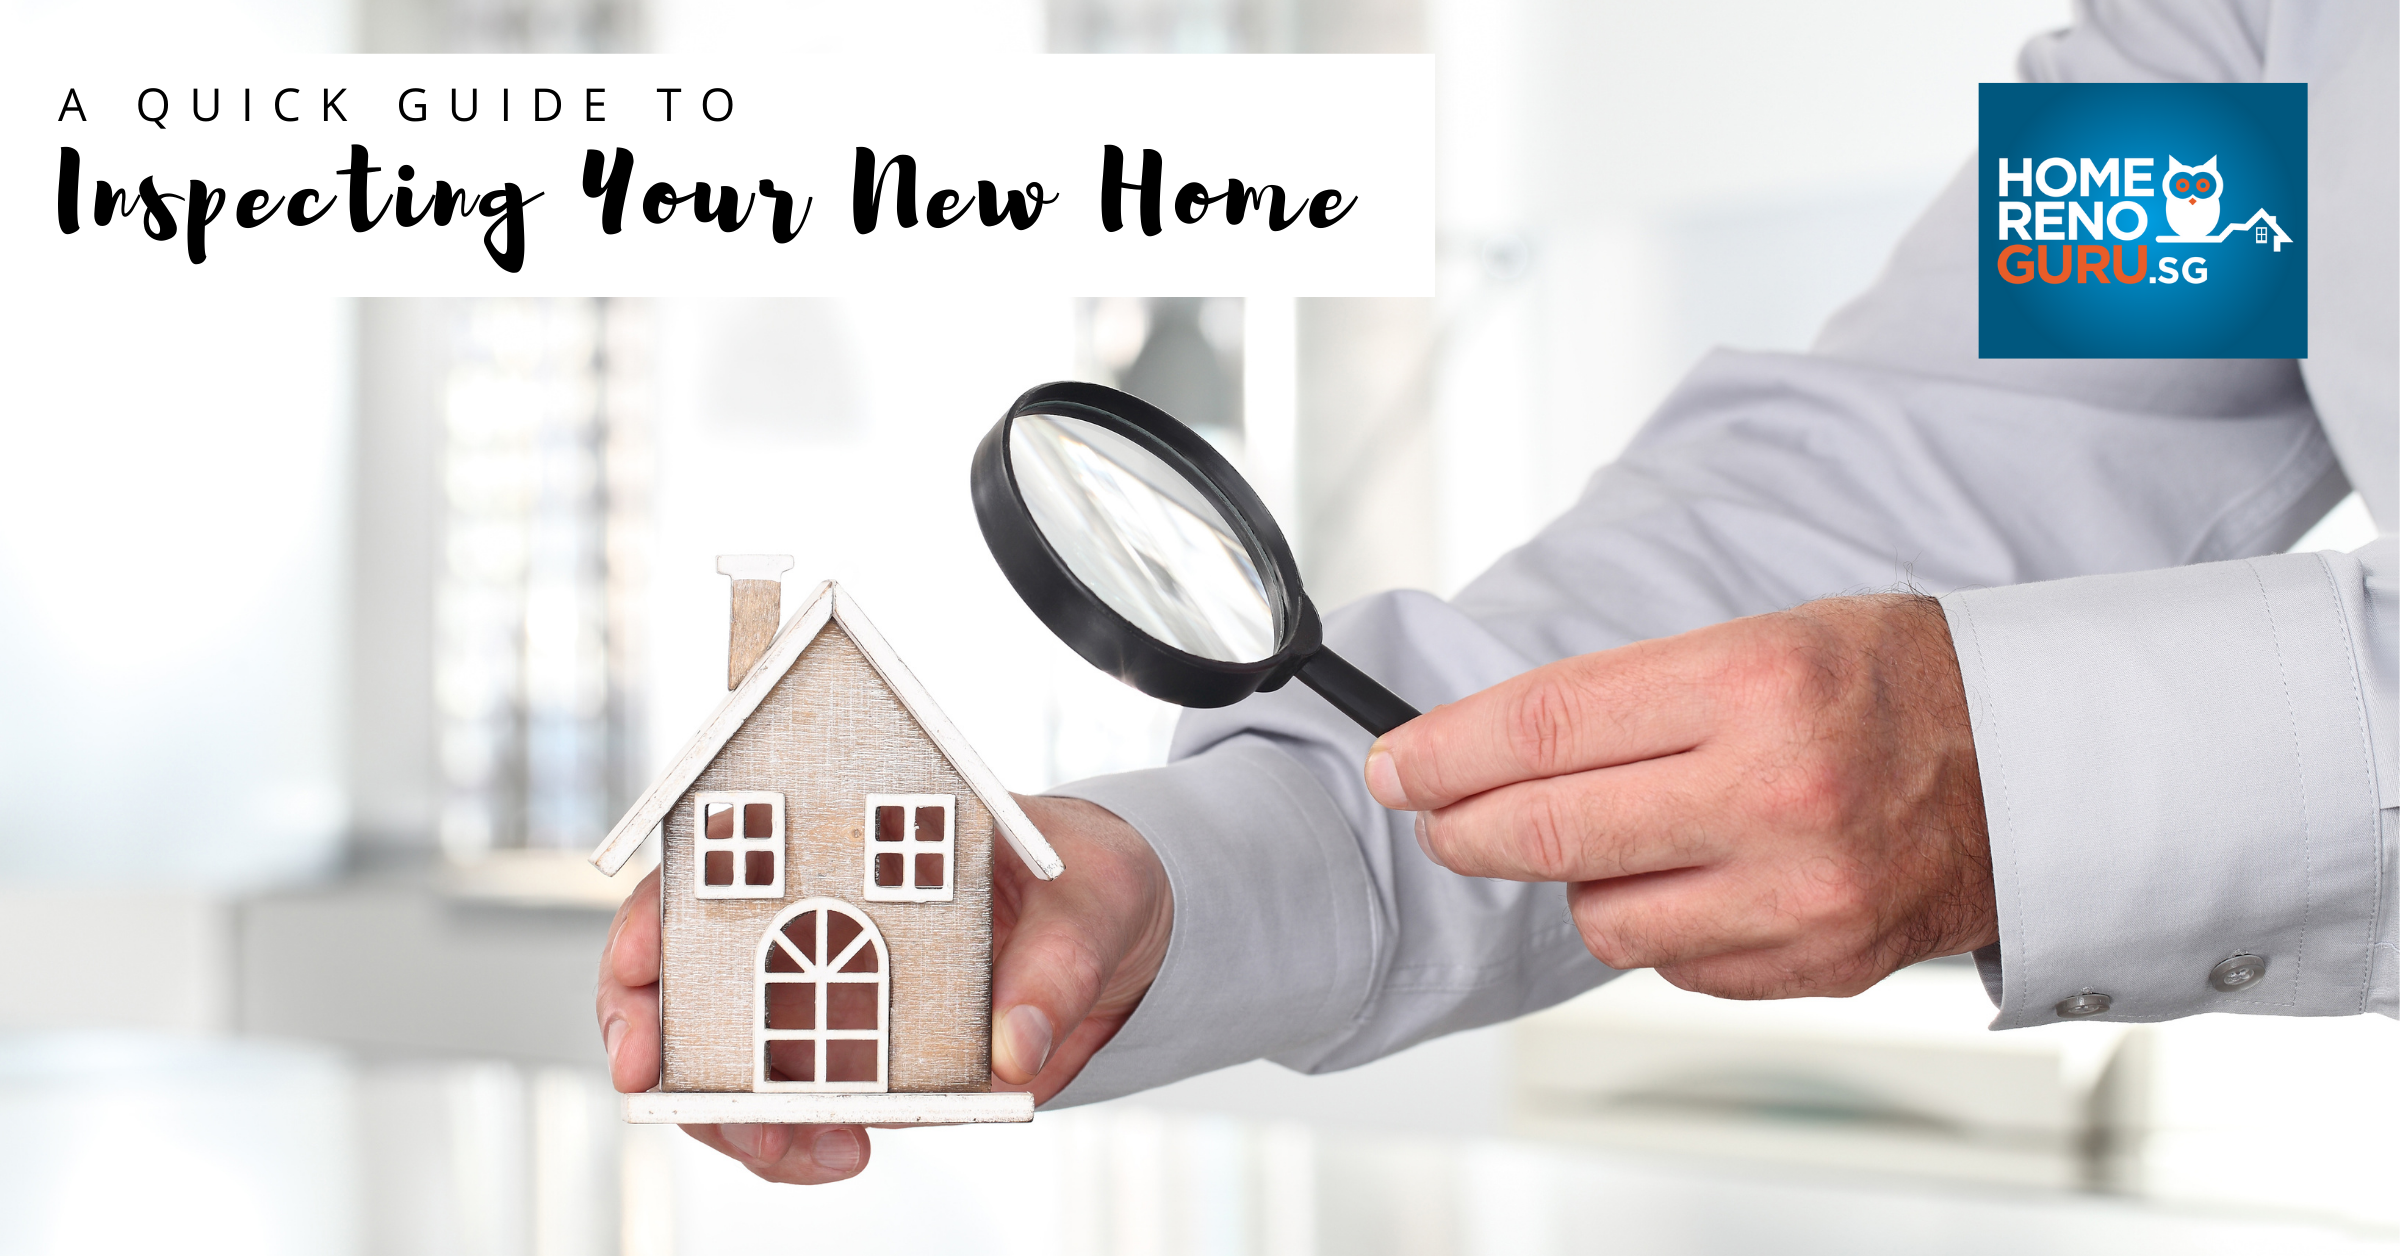 A Quick Guide to Inspecting Your New Home